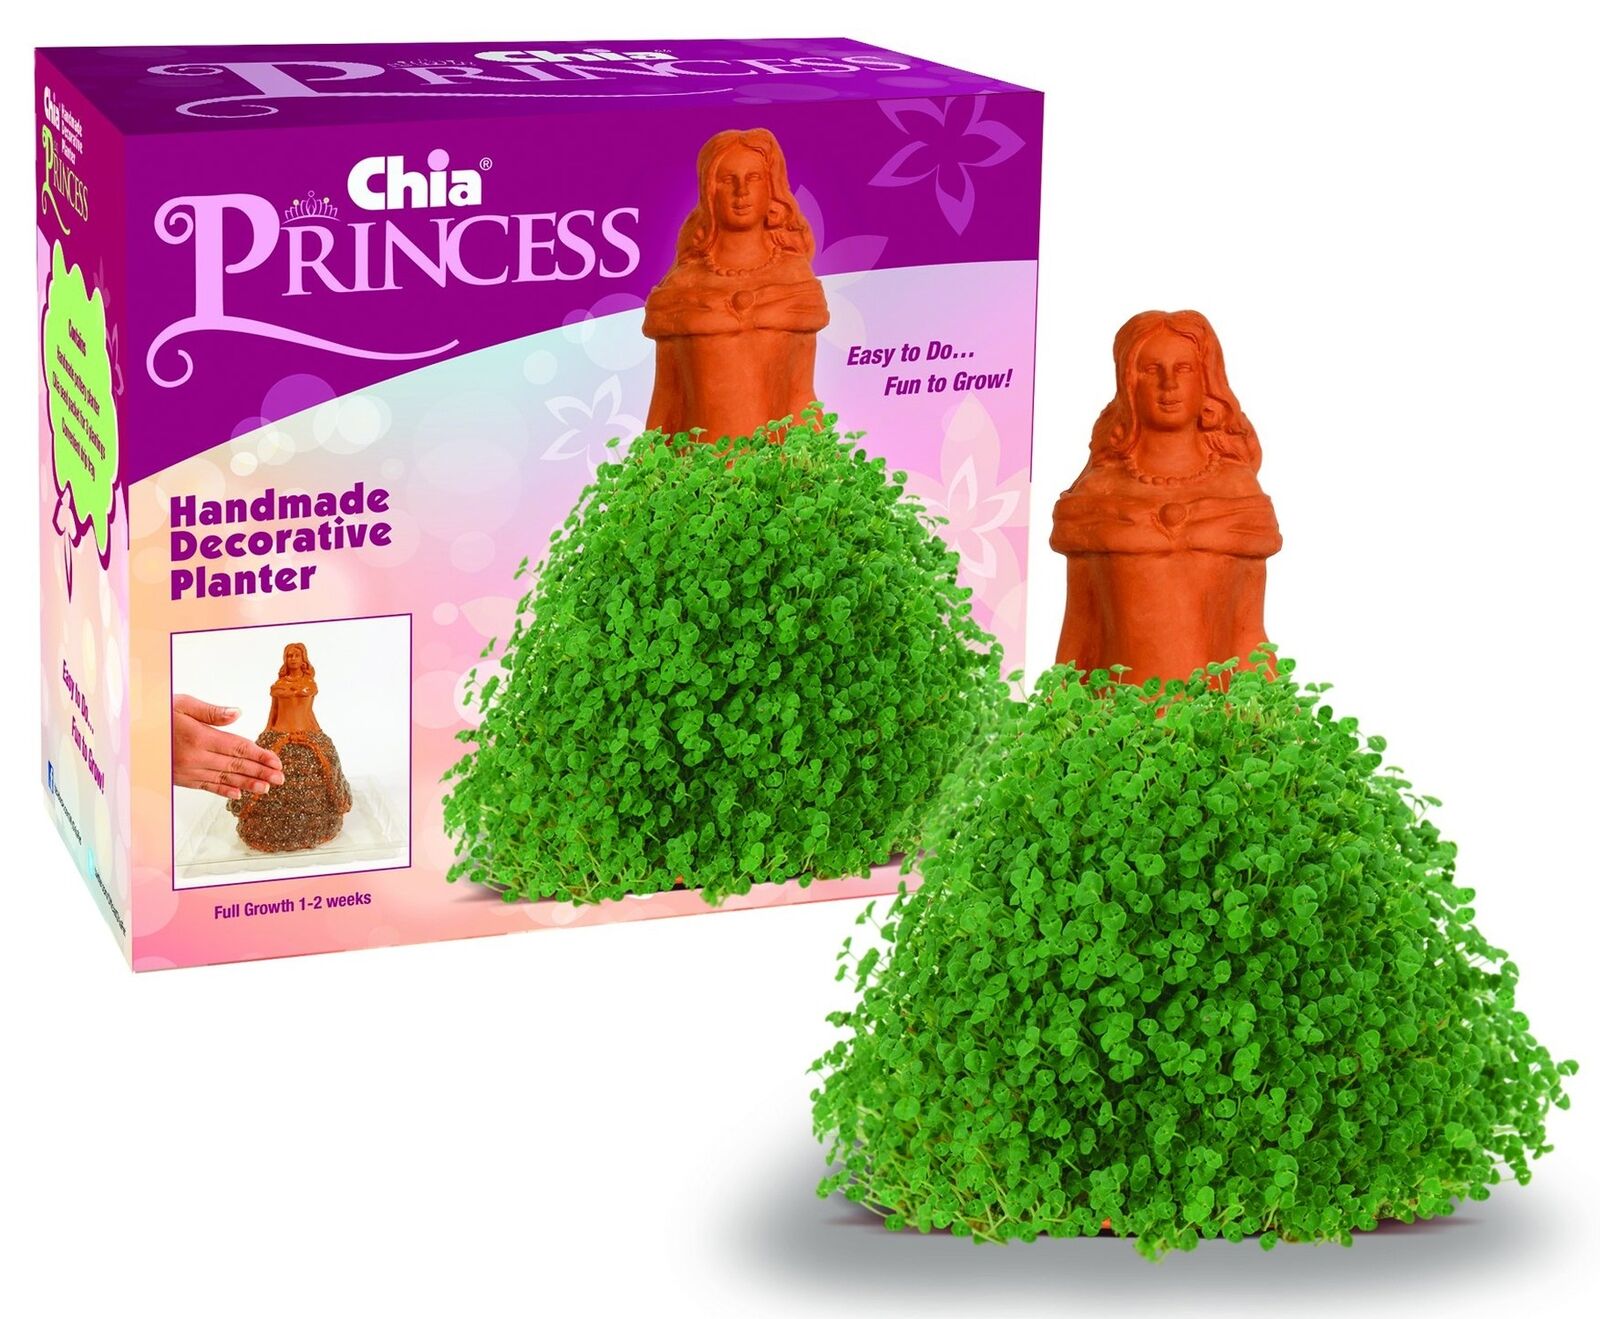 Chia Pet Princess with Seed Pack, Decorative Pottery Planter, Easy to Do and ...